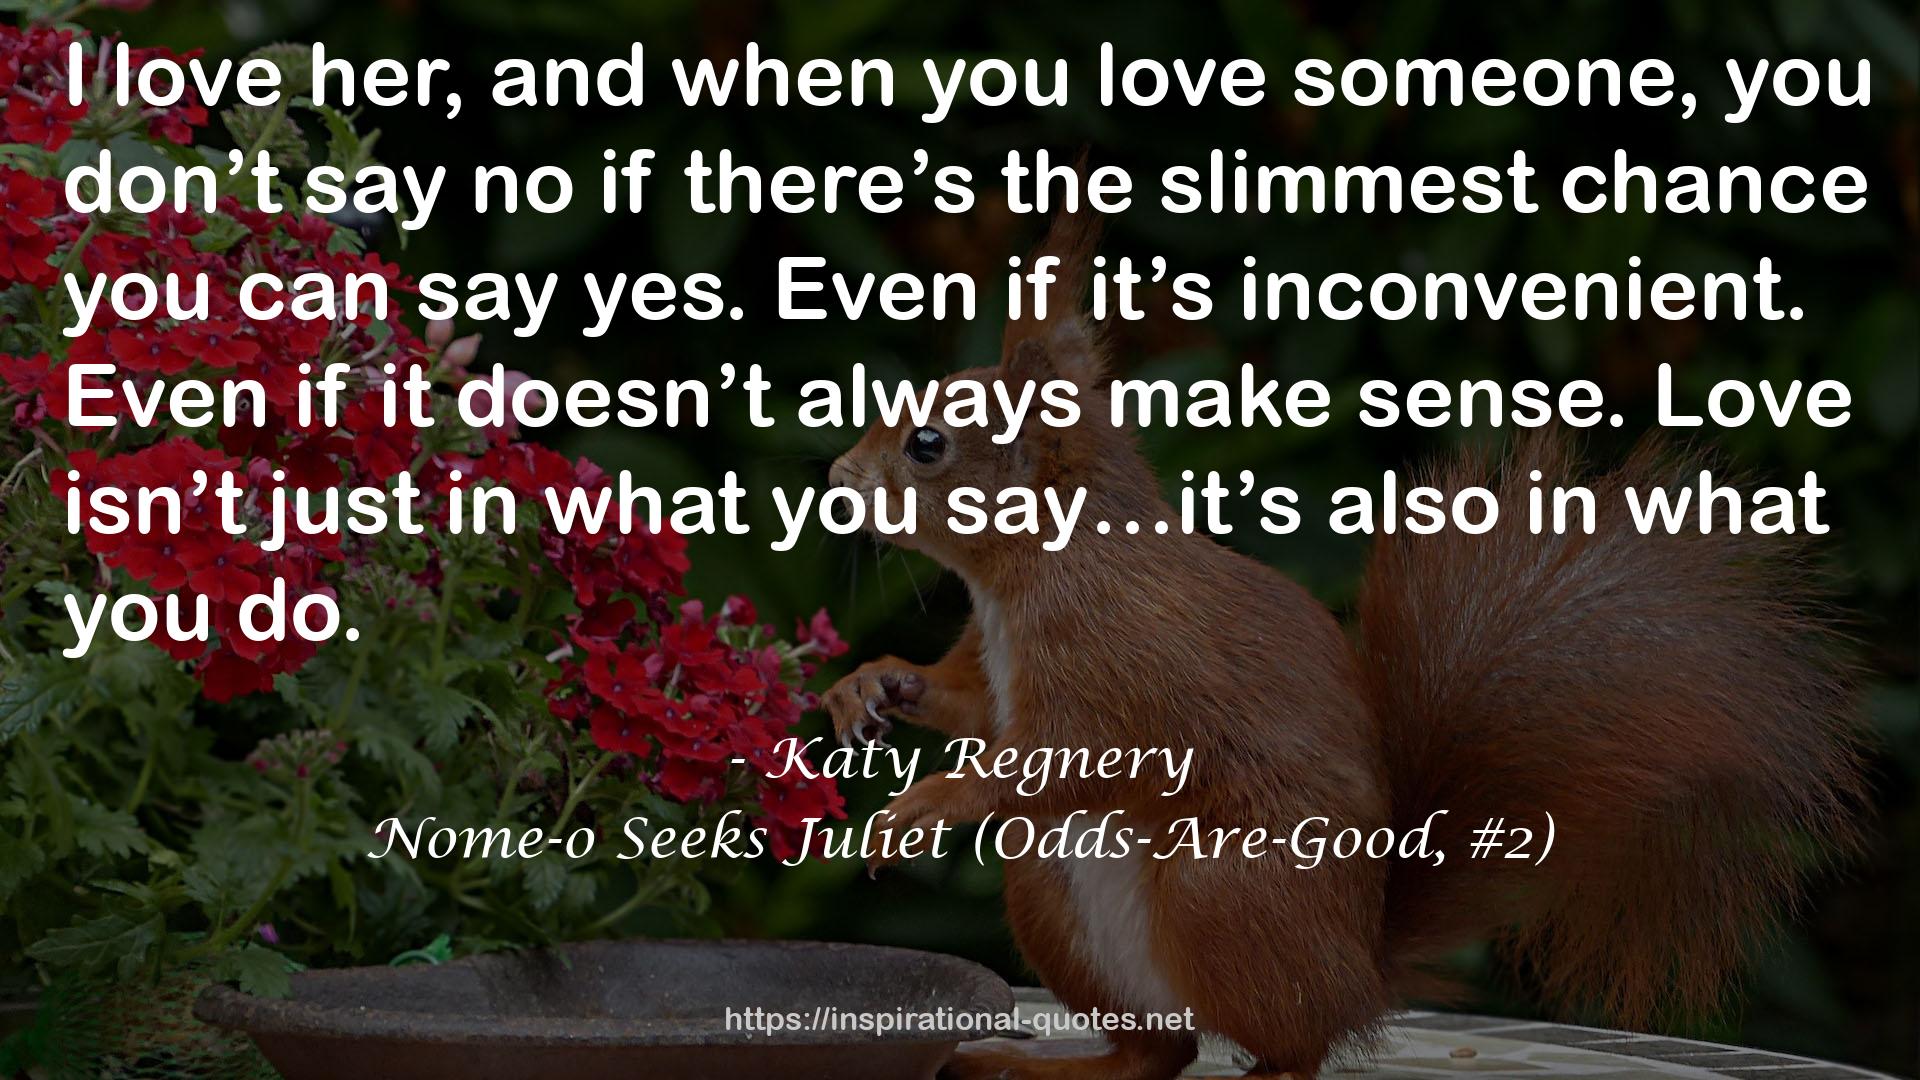 Nome-o Seeks Juliet (Odds-Are-Good, #2) QUOTES